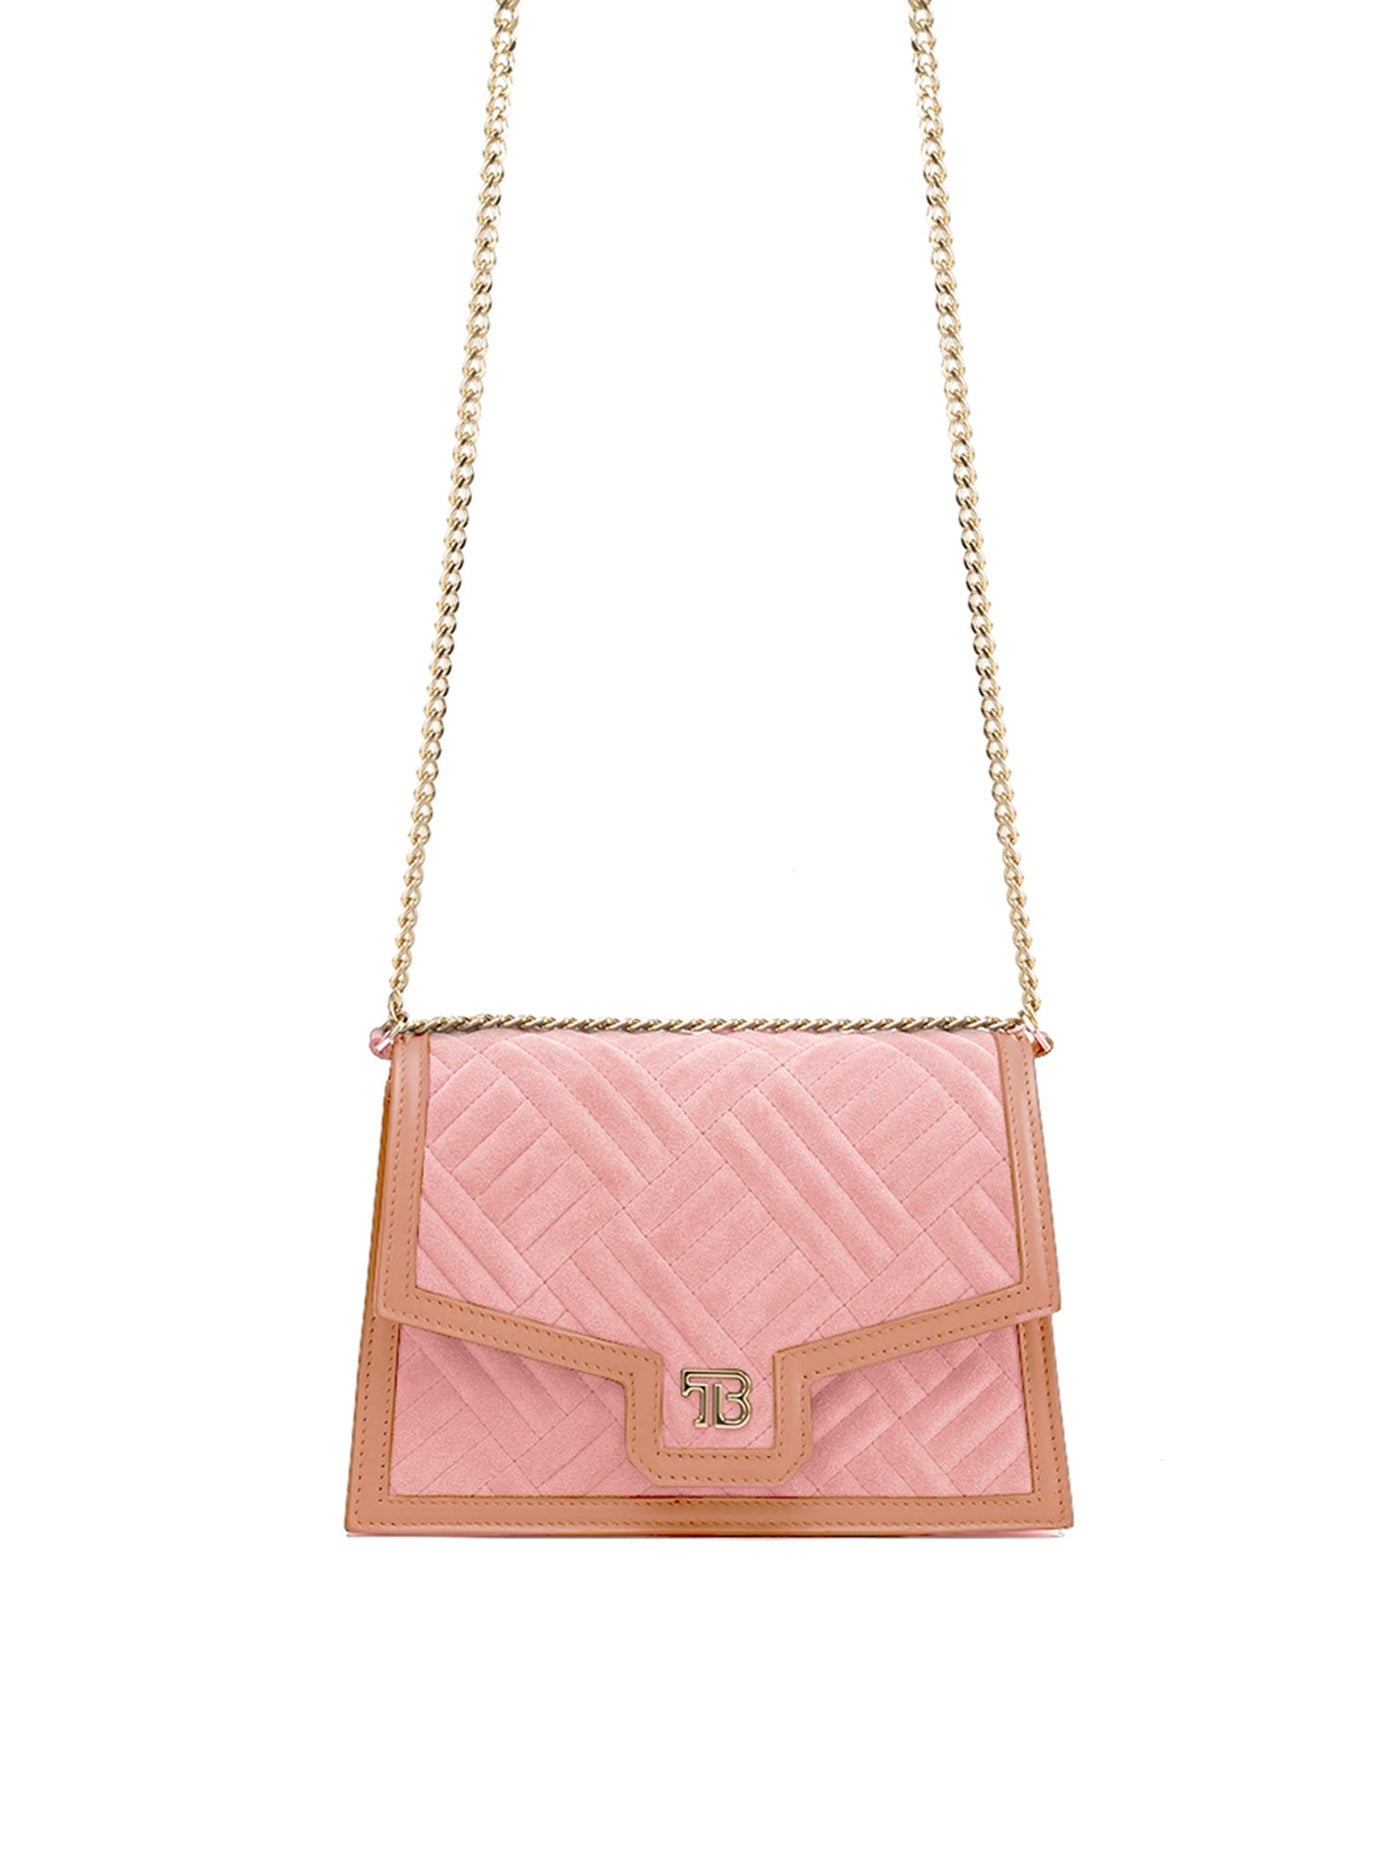 The Best Handbag for Fall: Teddy Blake Eliza Bag - Doused in Pink